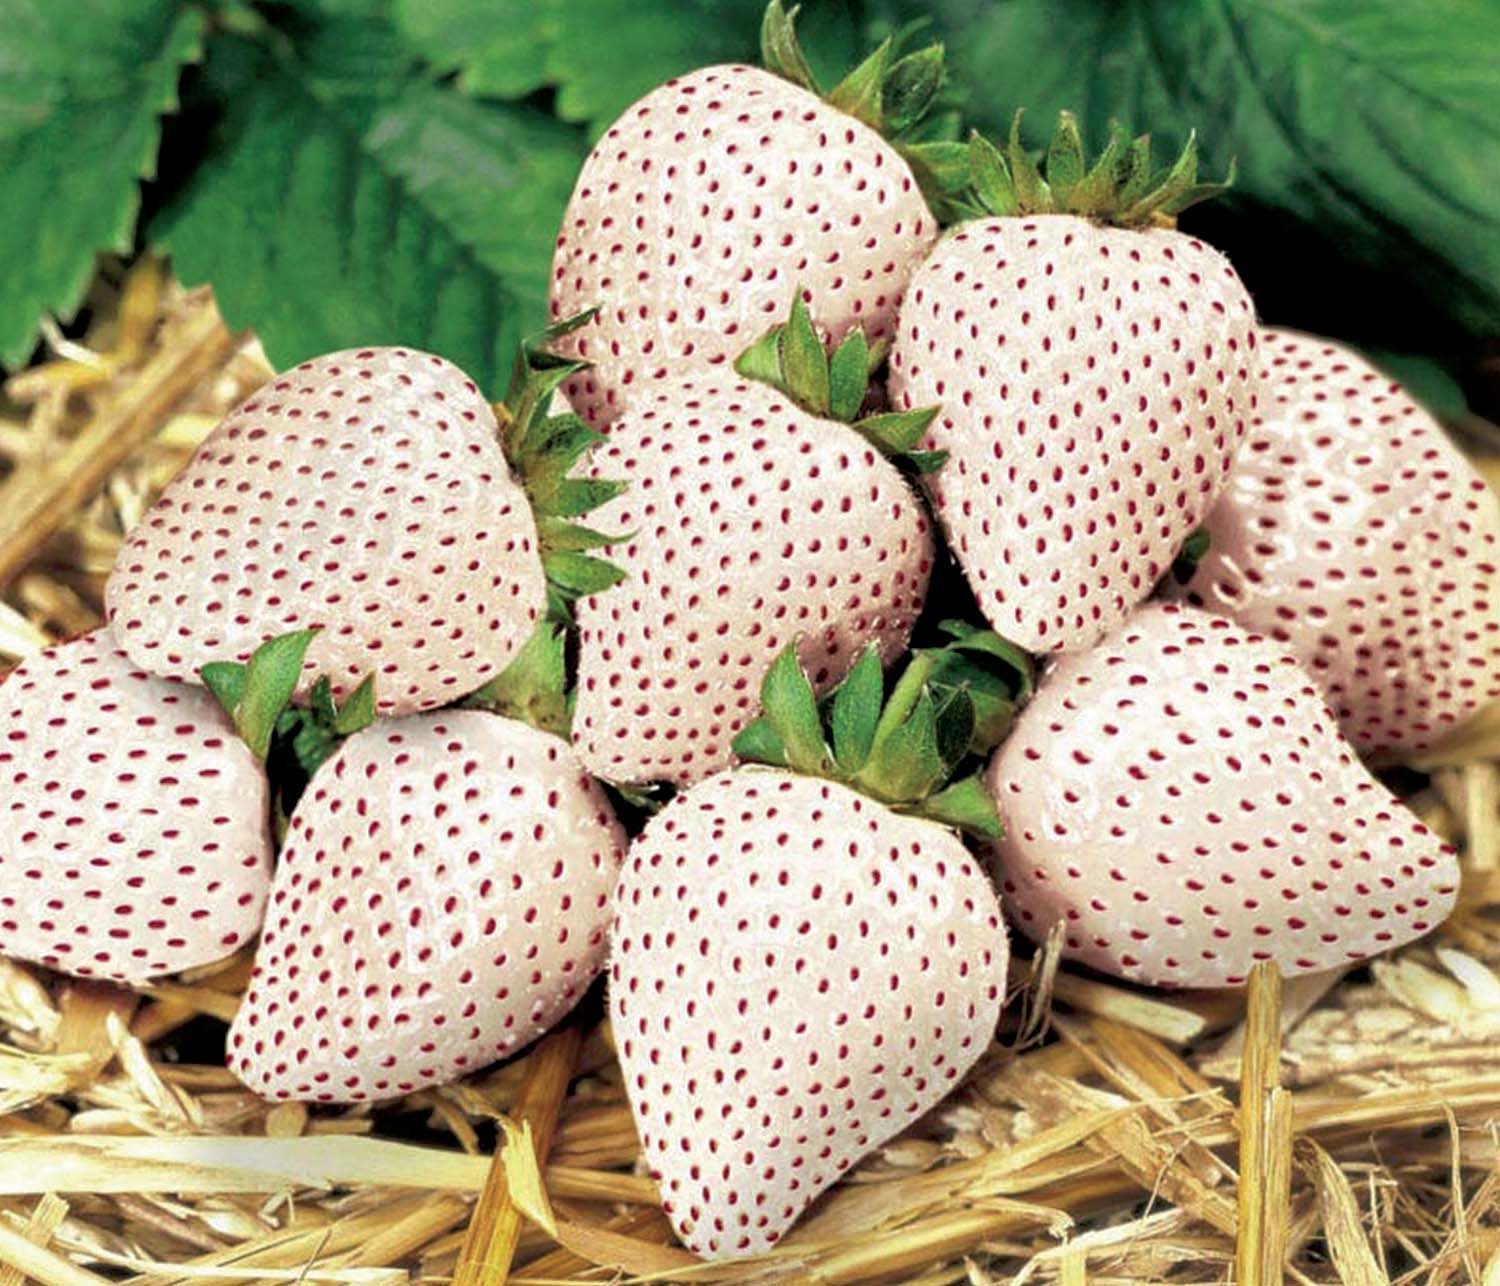 Several white strawberries or Pineberries with red seeds and green stems lying on straw.